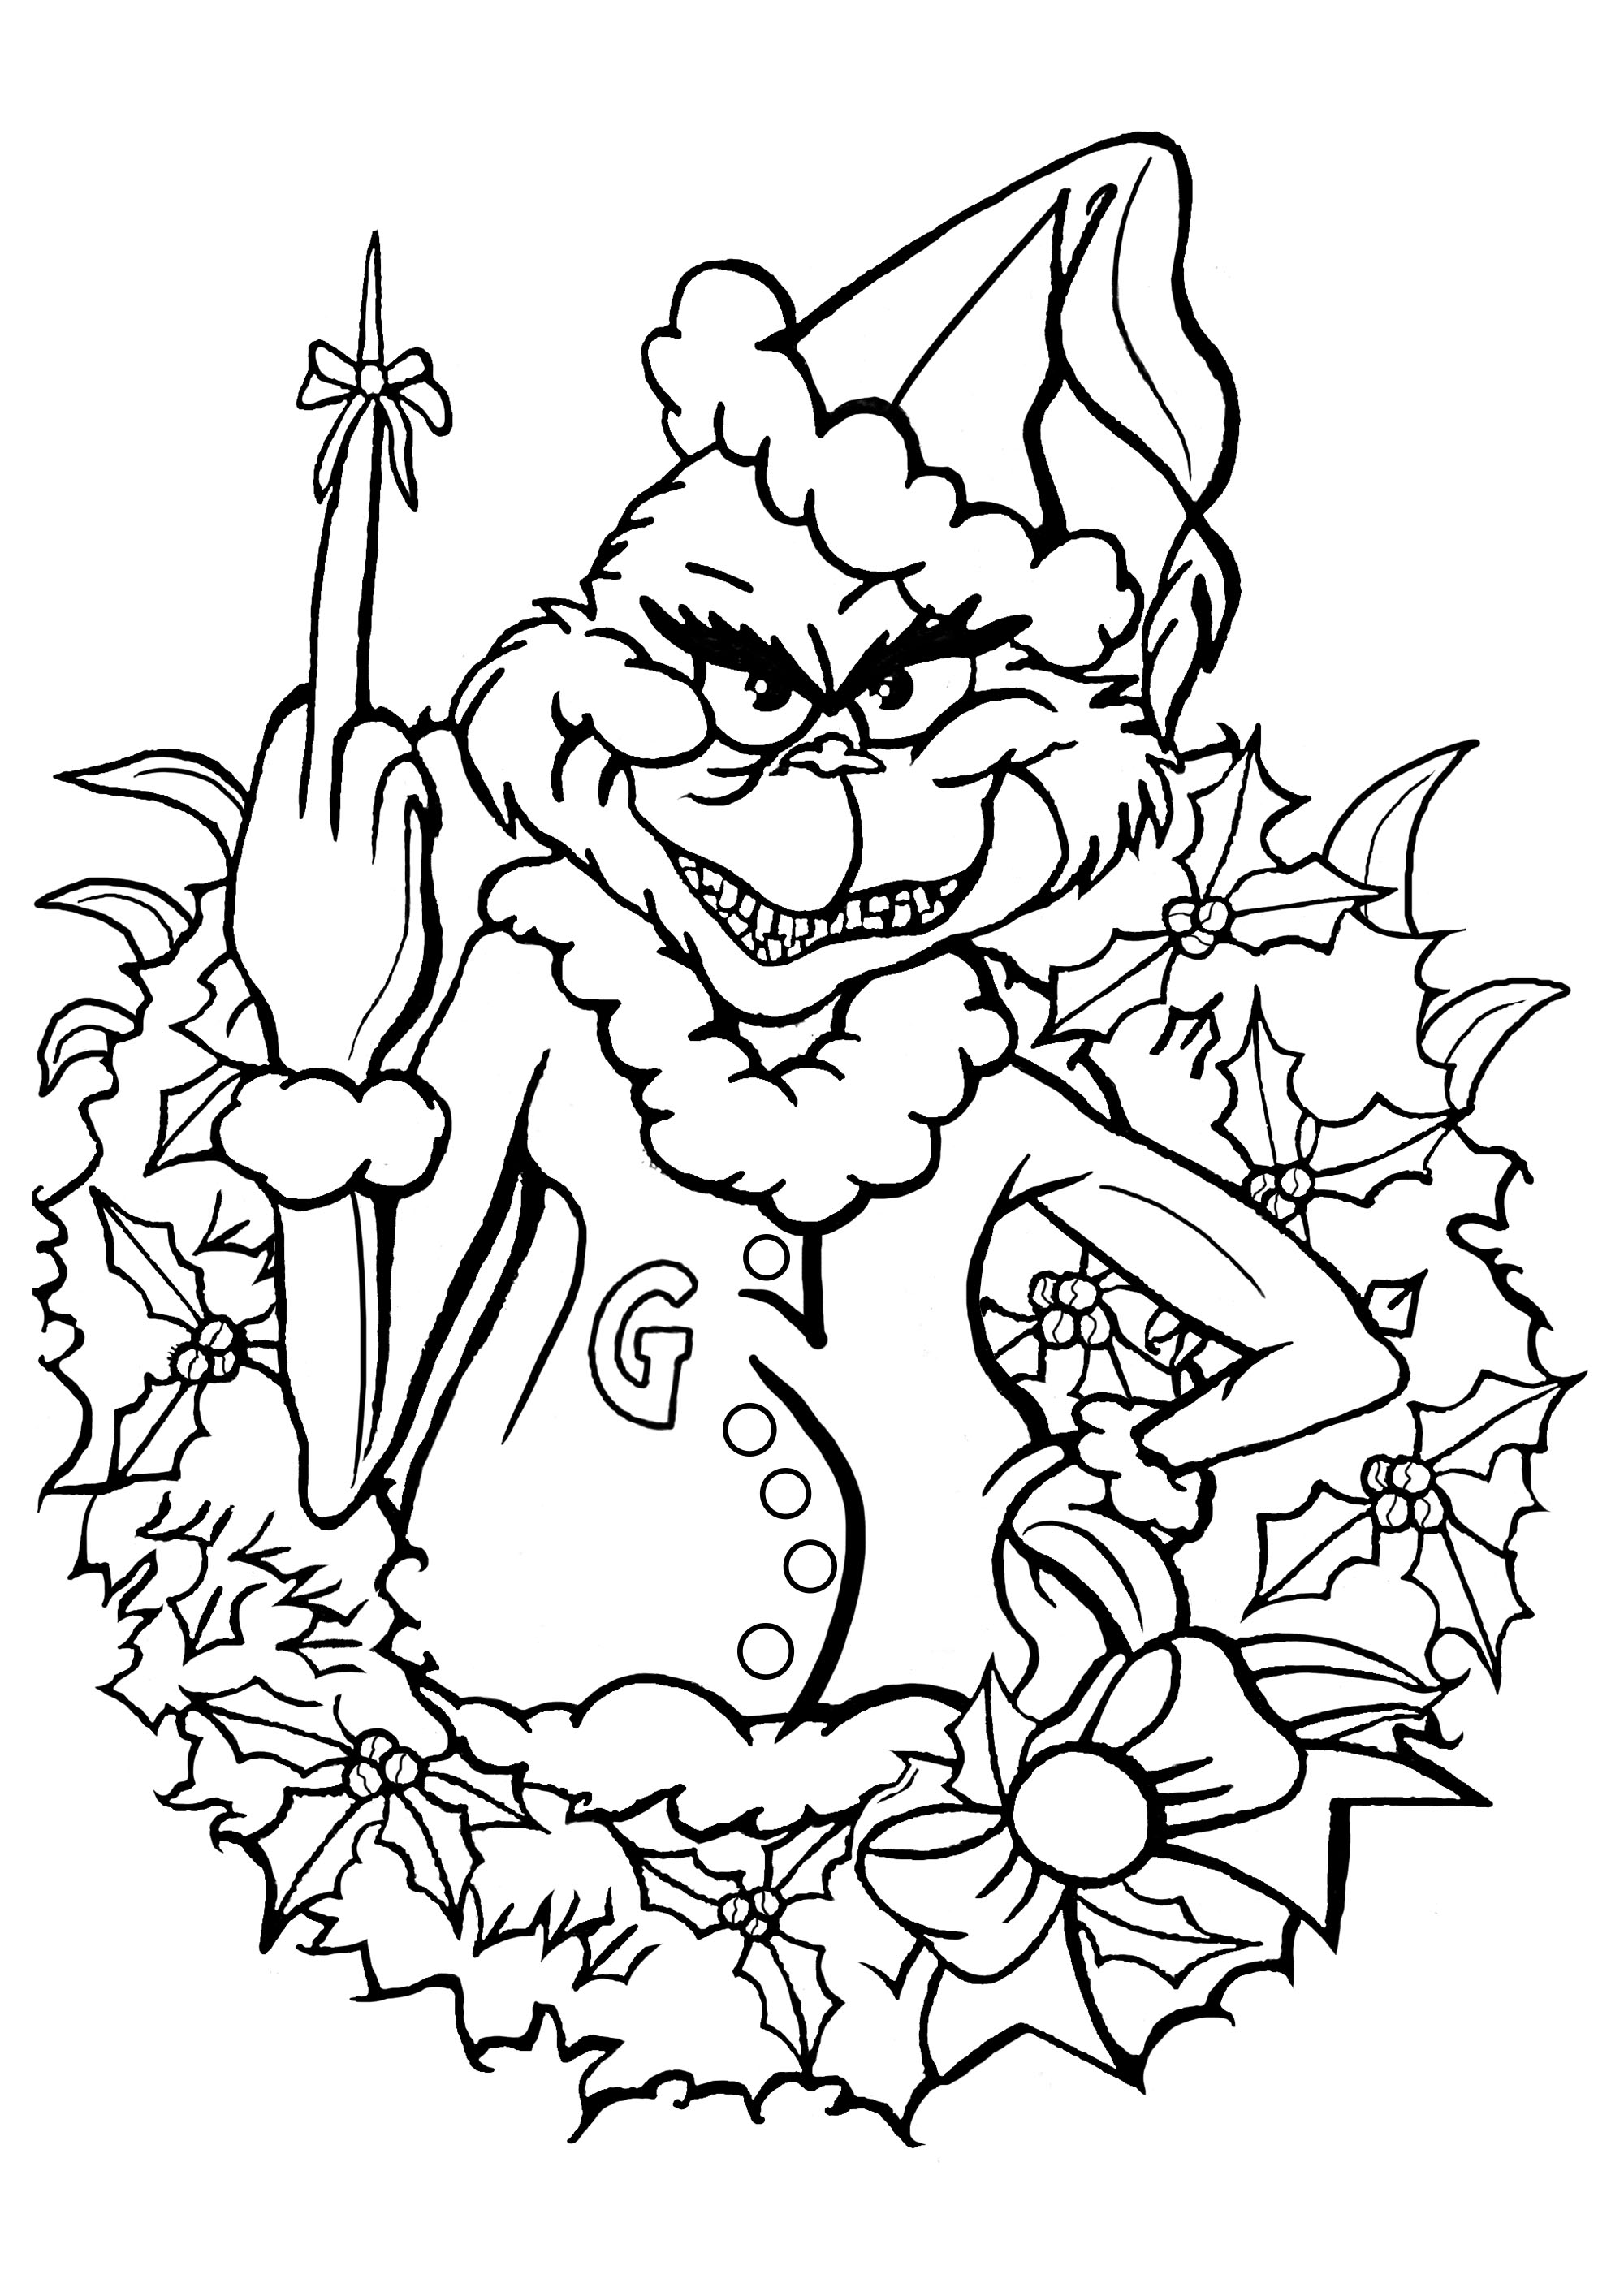 Scary Grinch With Wreath Coloring Page Free Printable Coloring Pages For Kids